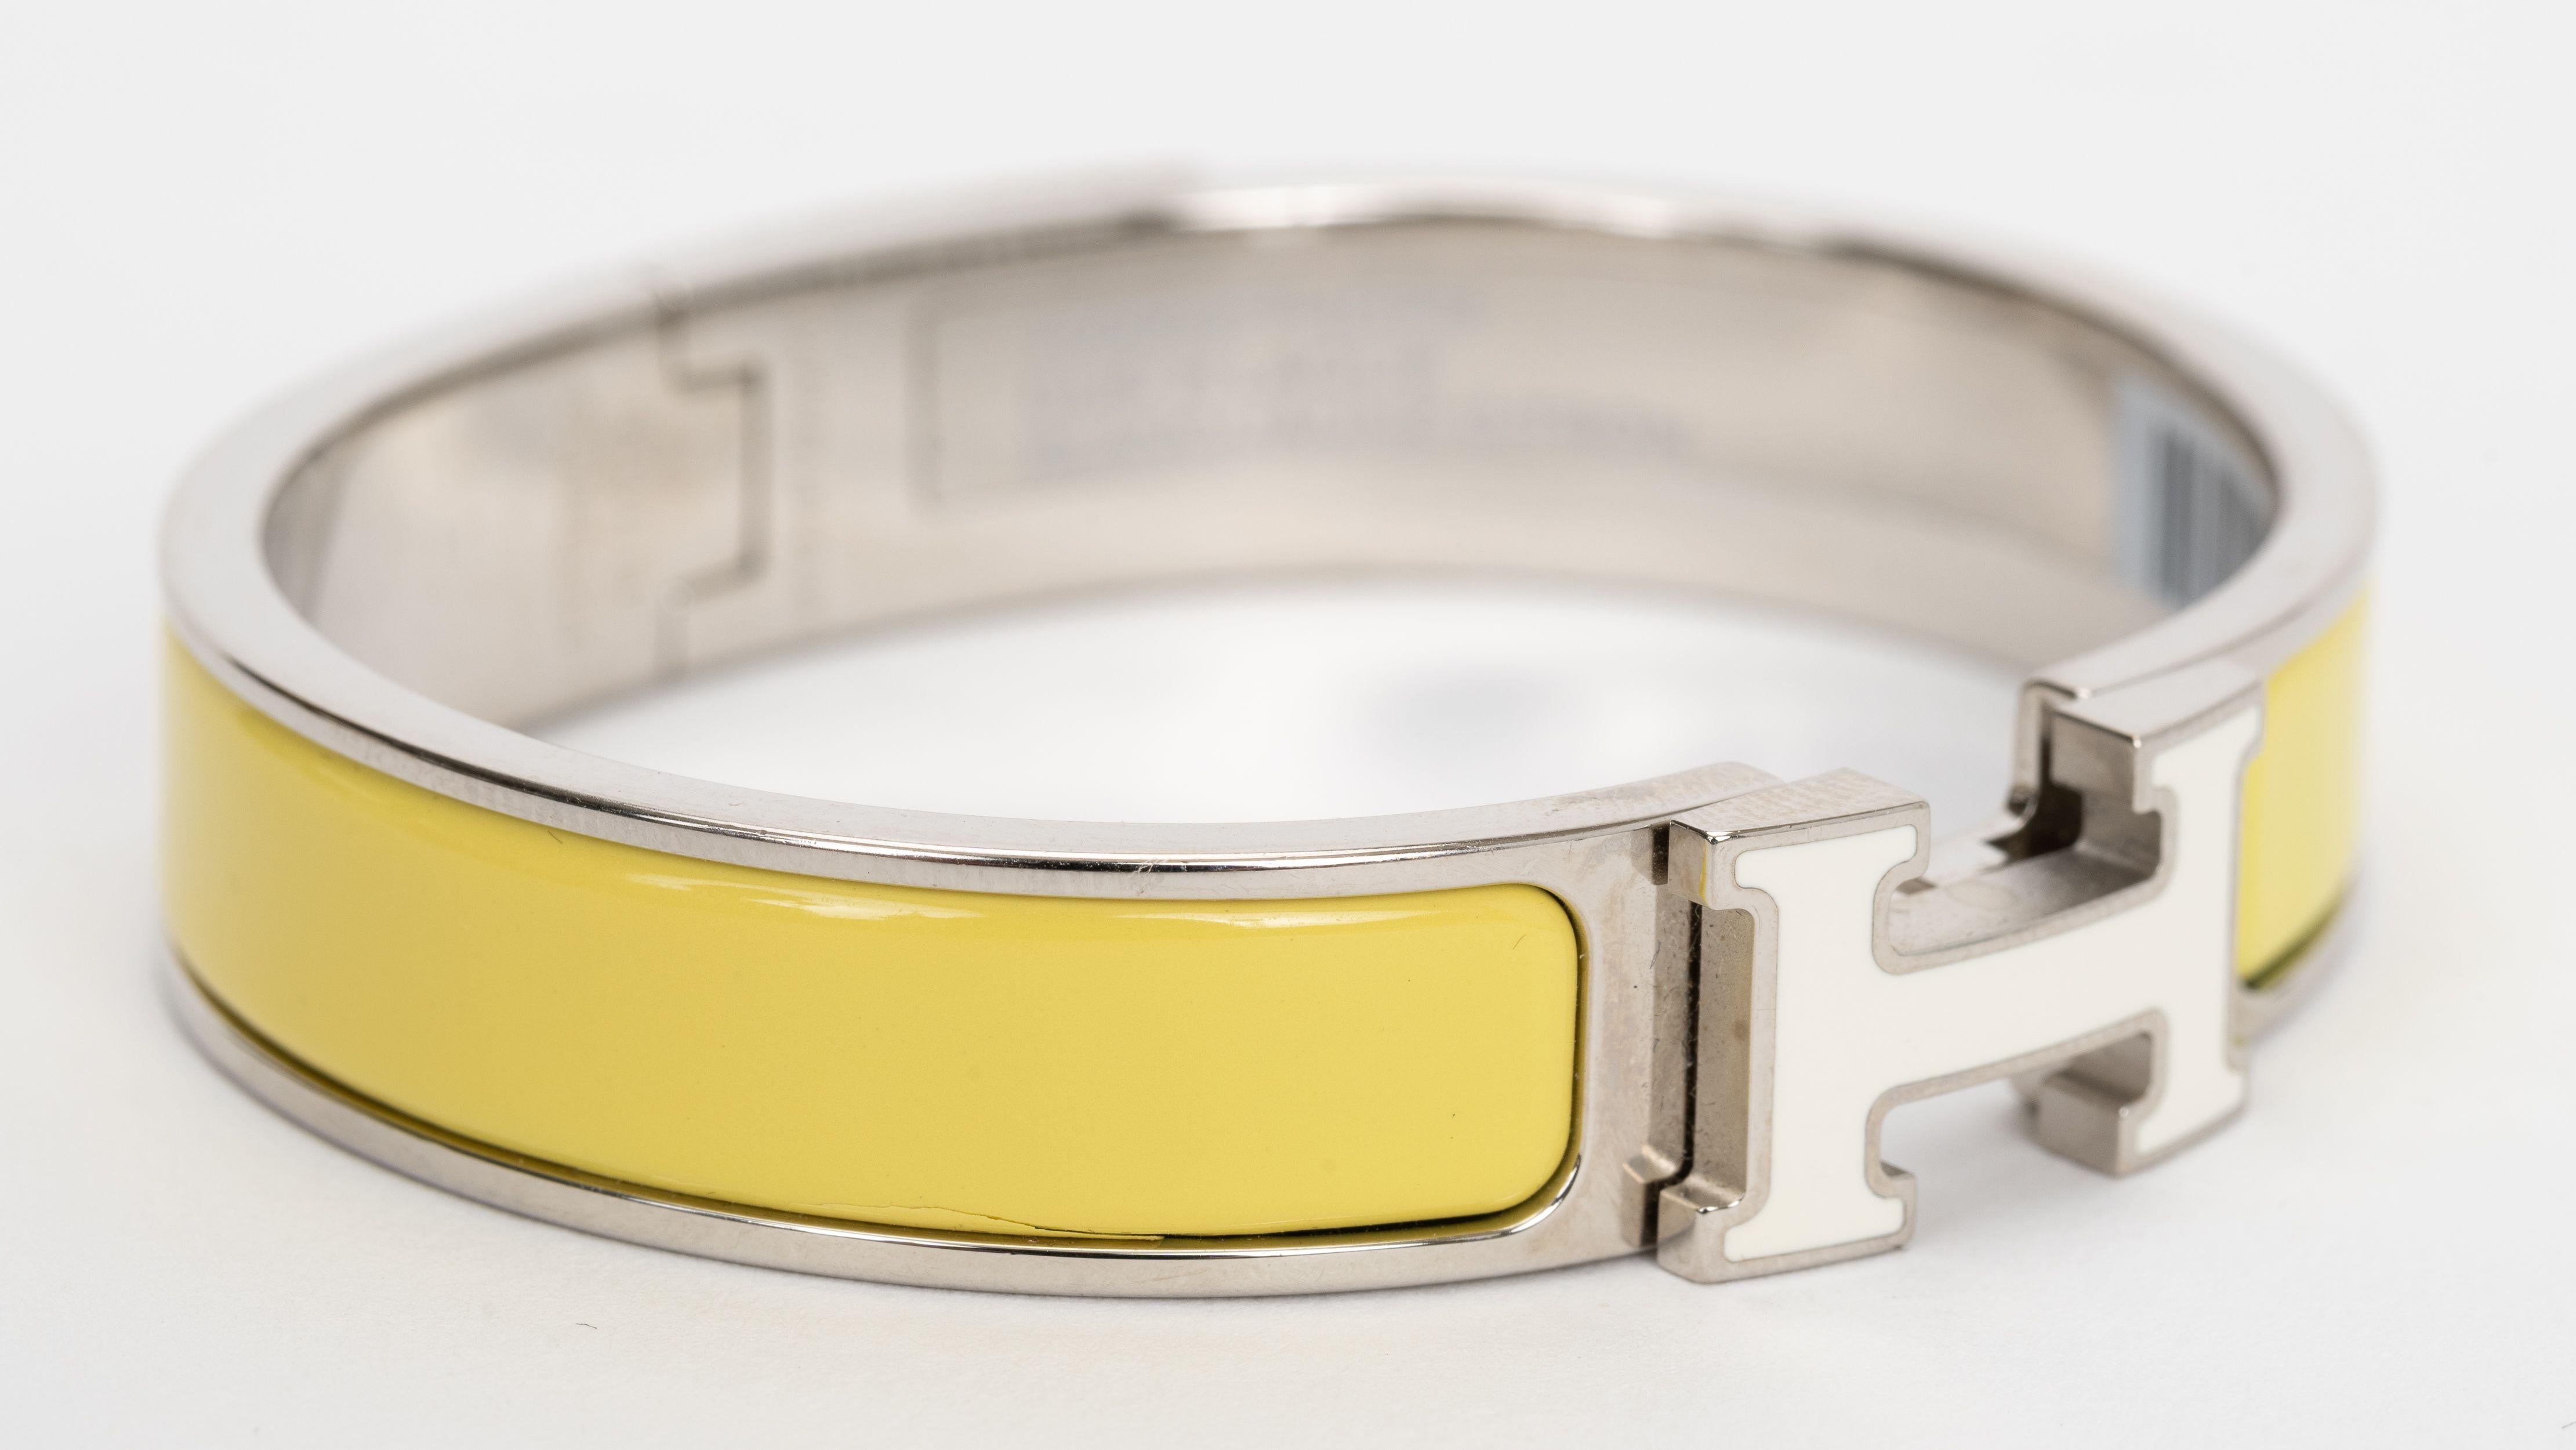 The Hermes Clic Clac H, narrow bracelet in jaune citron enamel, white enamel H with Palladium-plated hardware.
Size PM, new in unworn condition, comes with velvet pouch